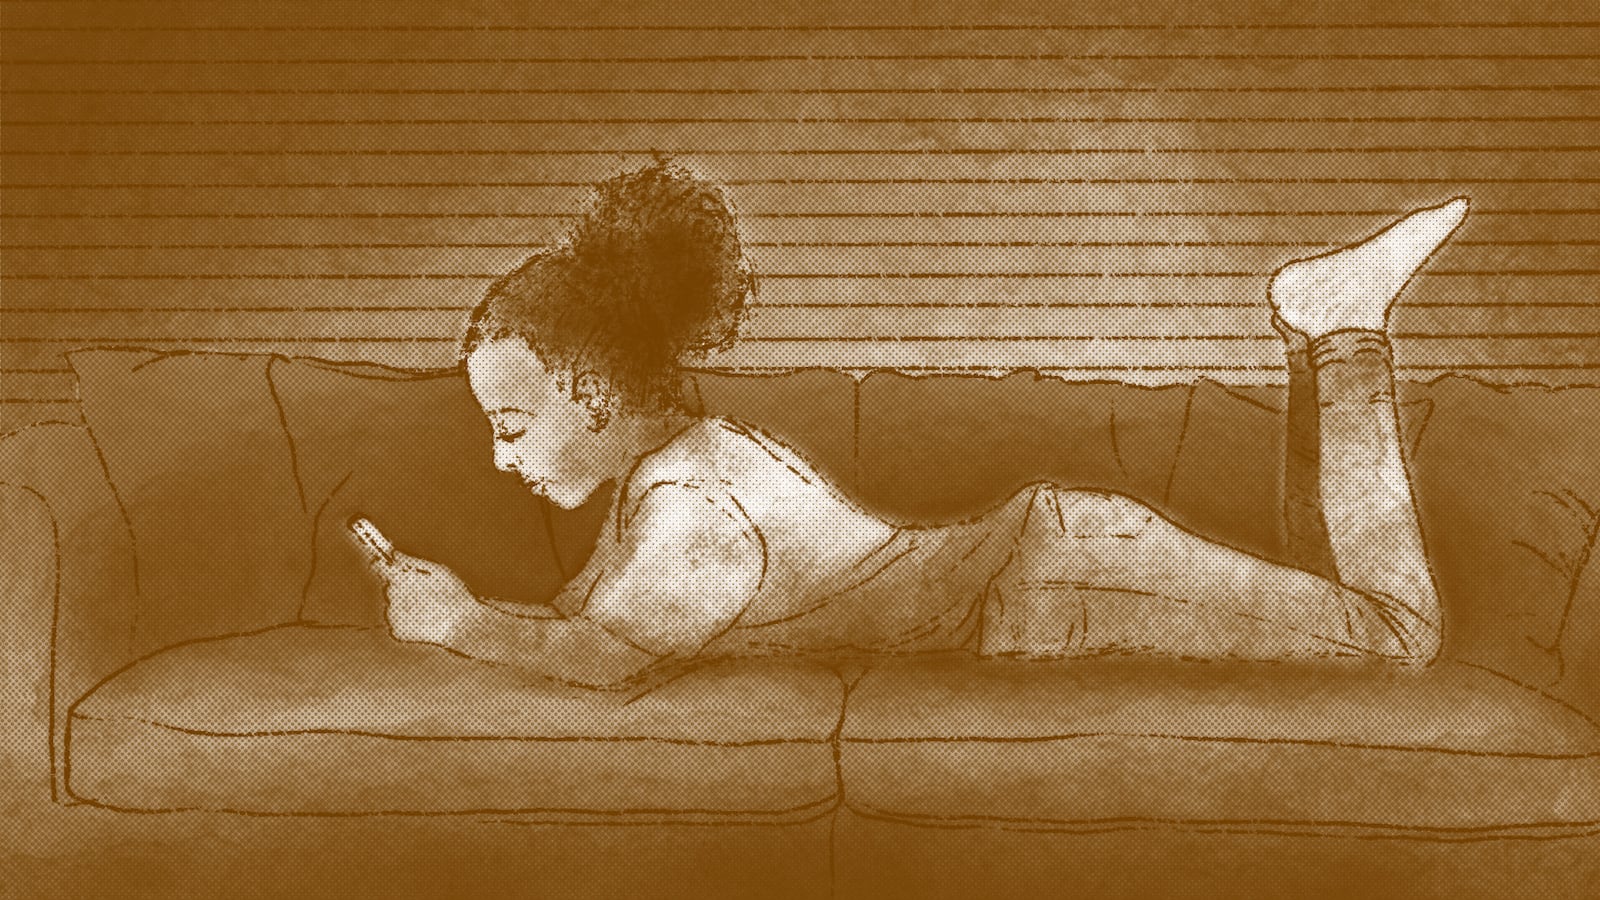 A brown and white illustration of a young girl lying on a couch looking at a cellphone. A window with blinds in the background.